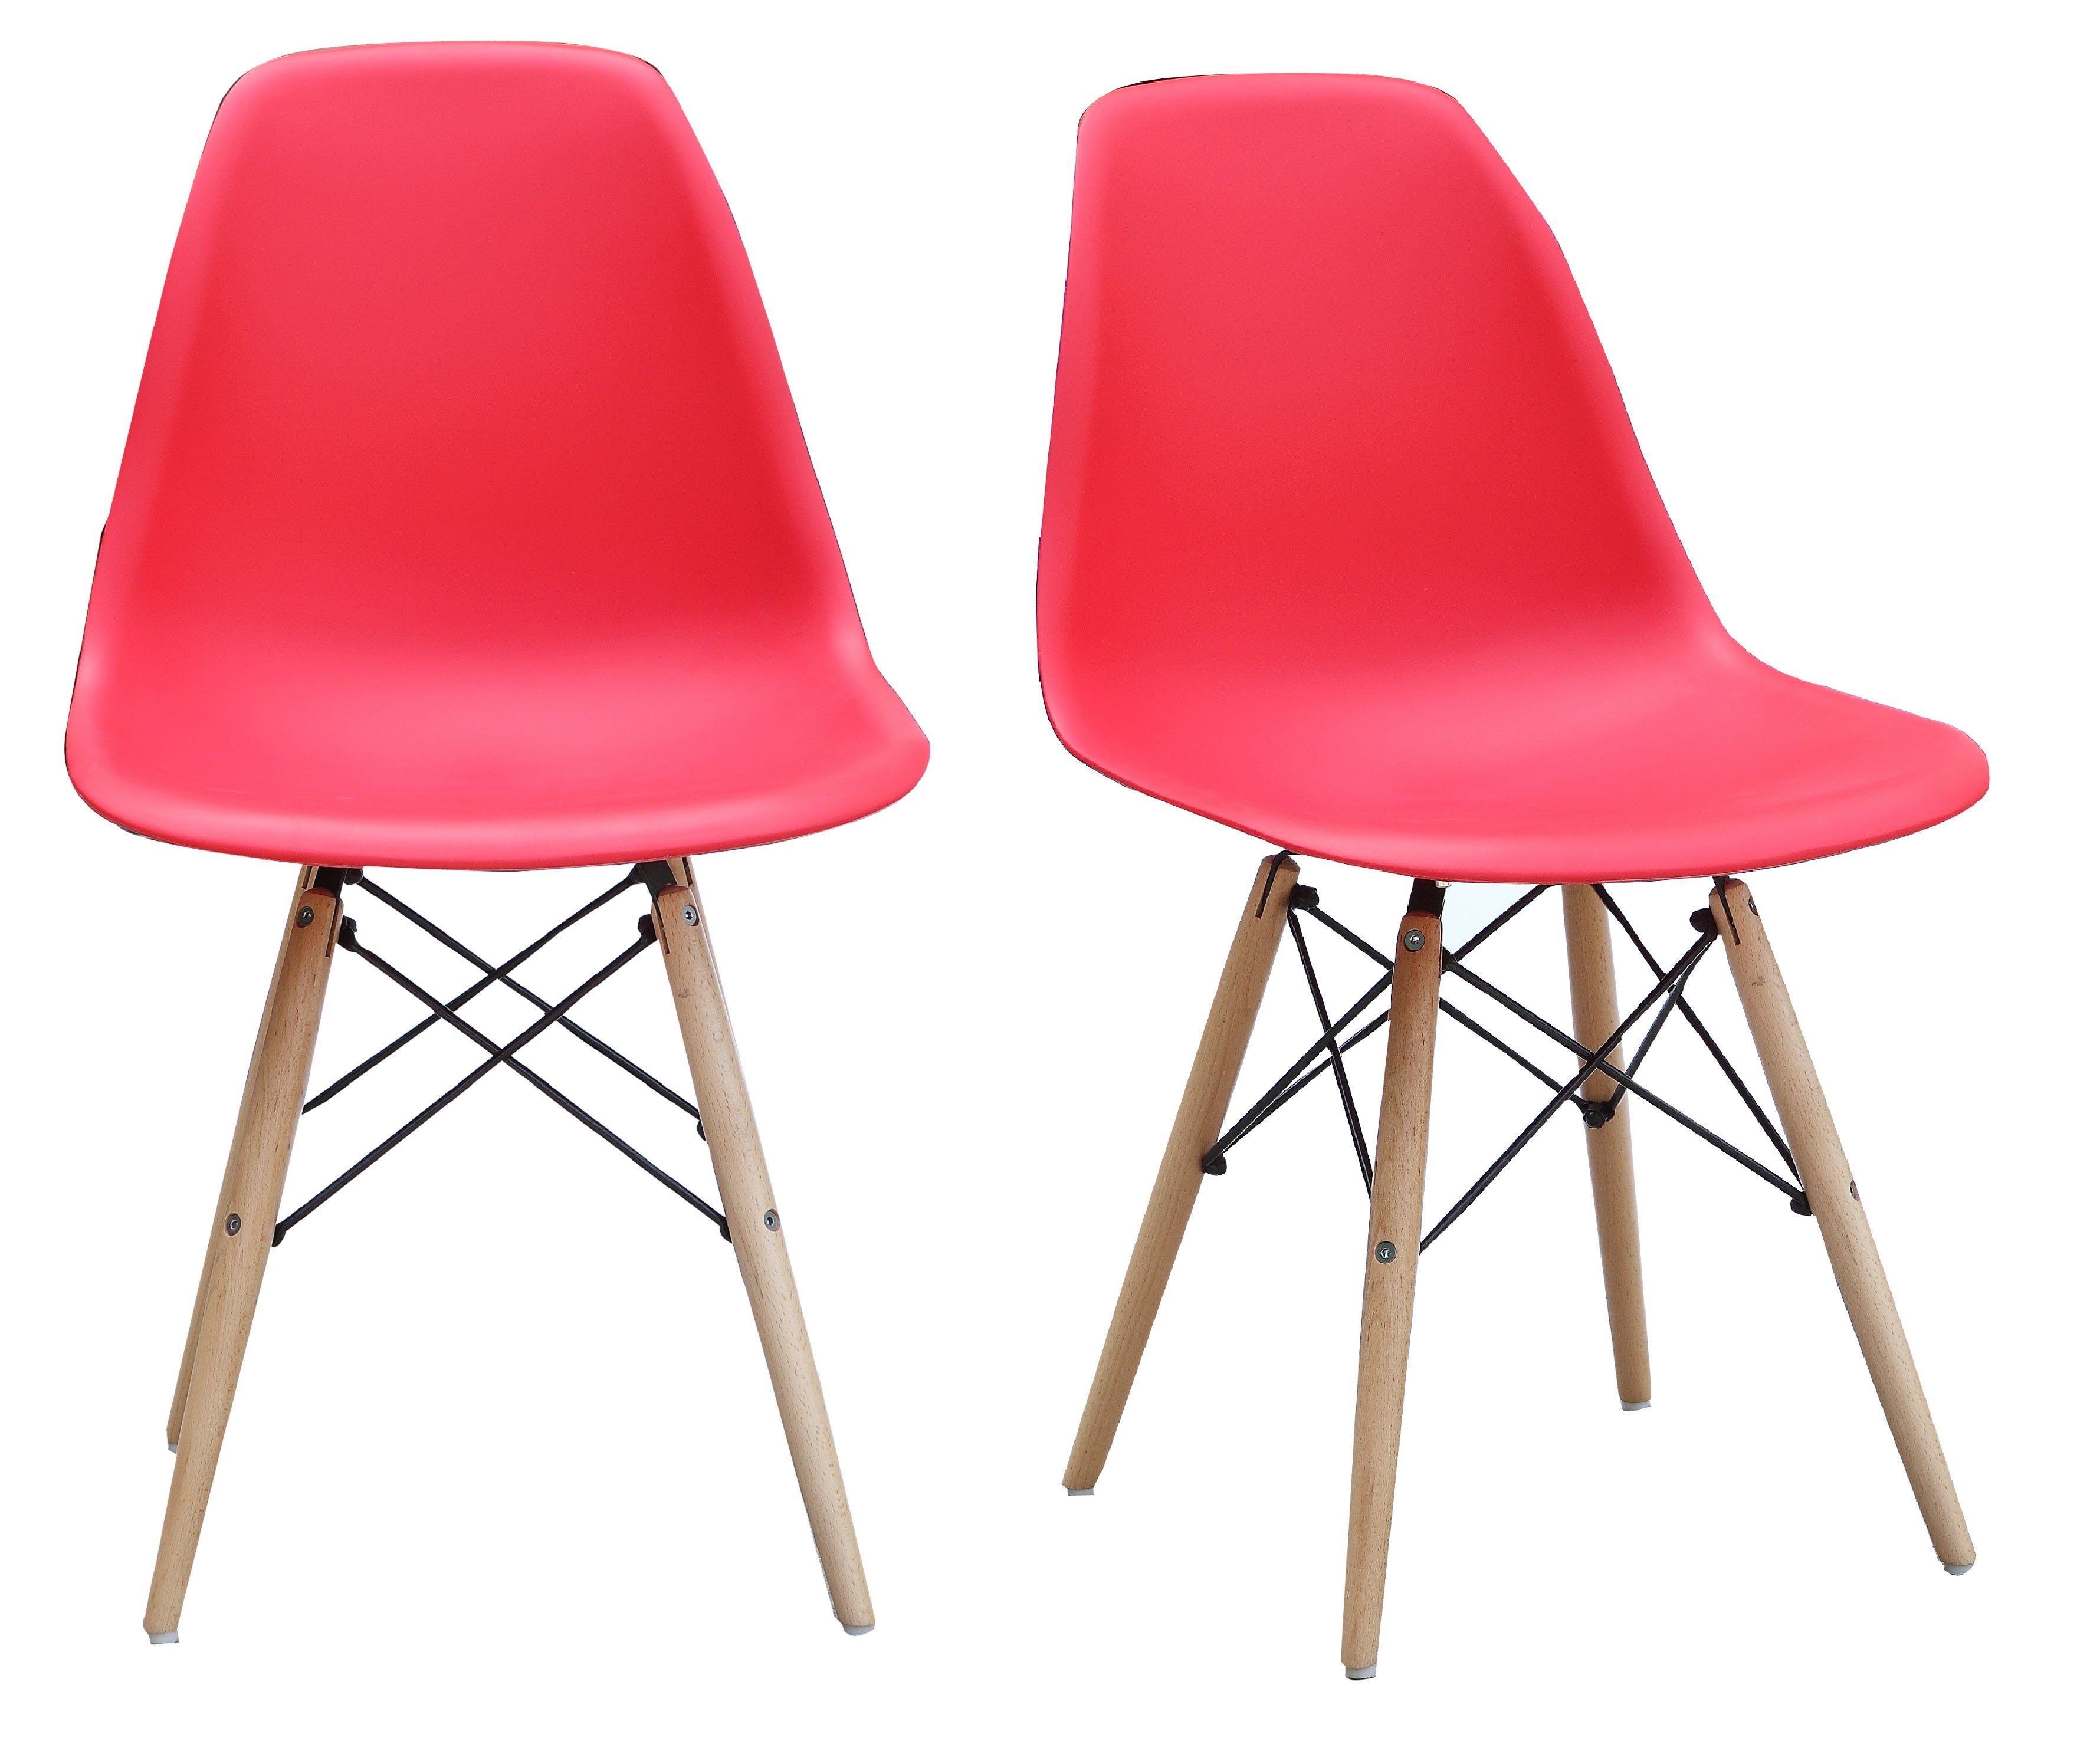 ViscoLogic Prague High Back Molded Plastic Side Dining Chair with Natural Wood Legs (Set of 2) Raspberry Red